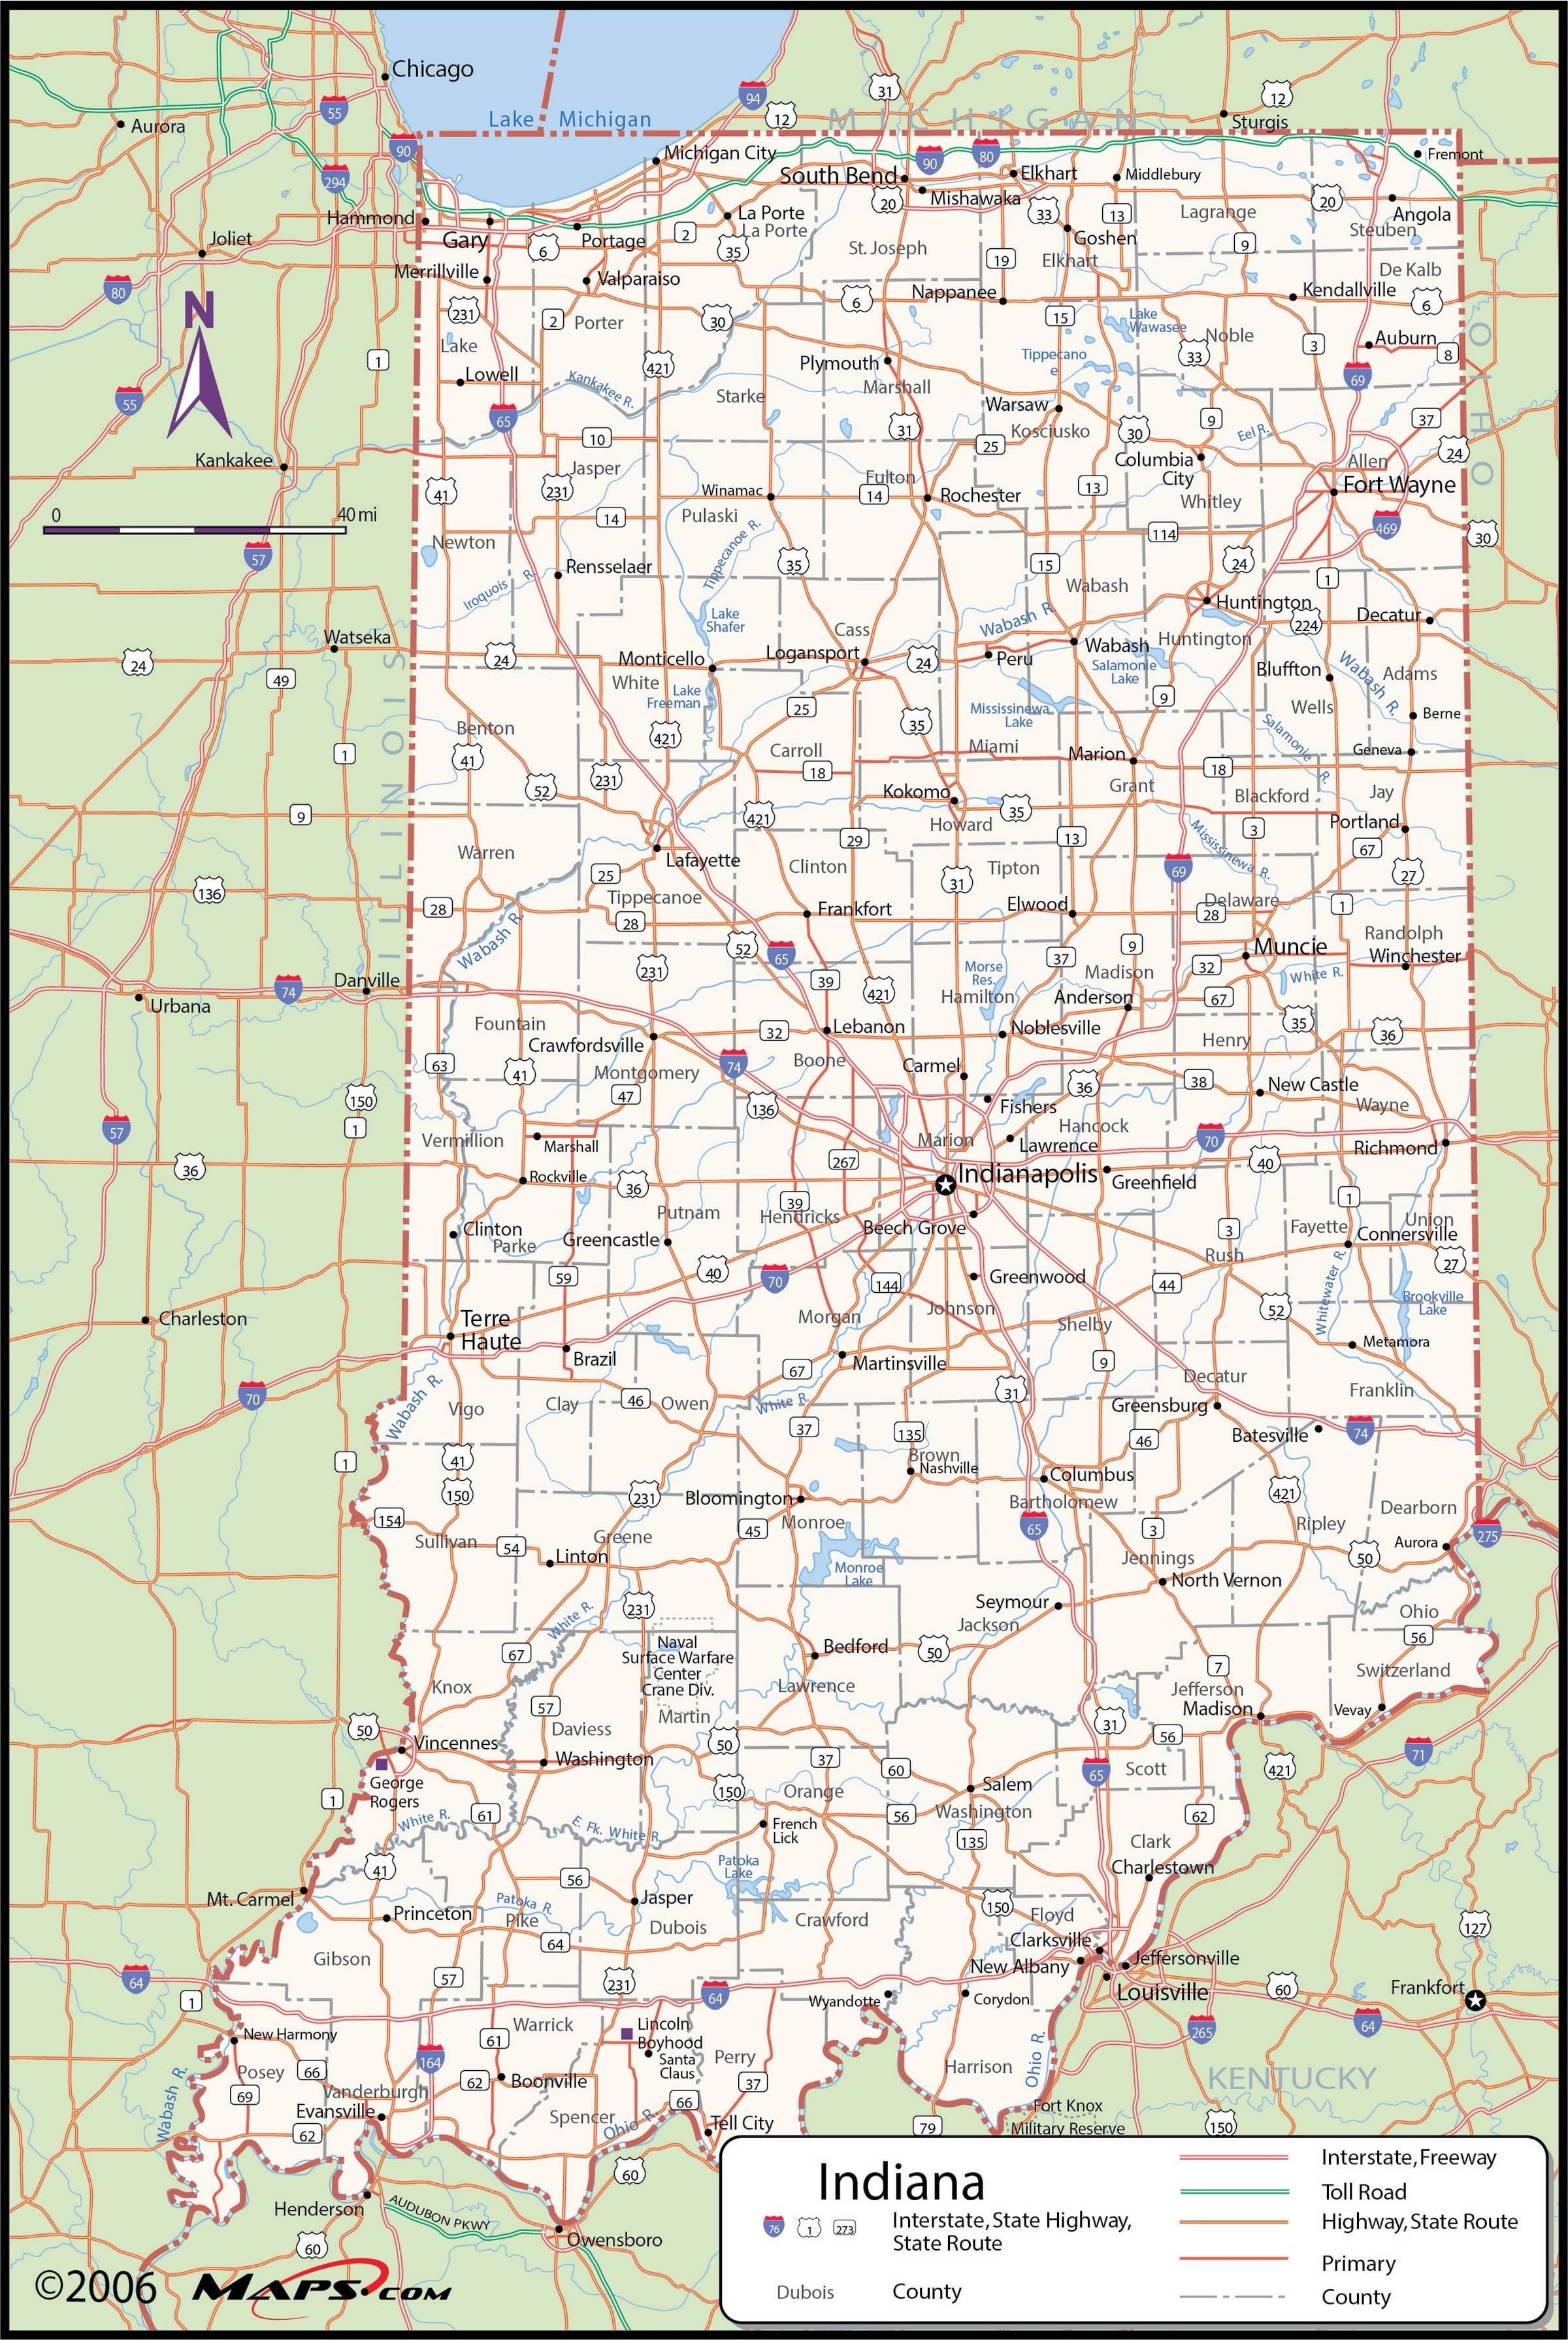 Indiana Map With County Lines Indiana County Wall Map | Maps.com.com